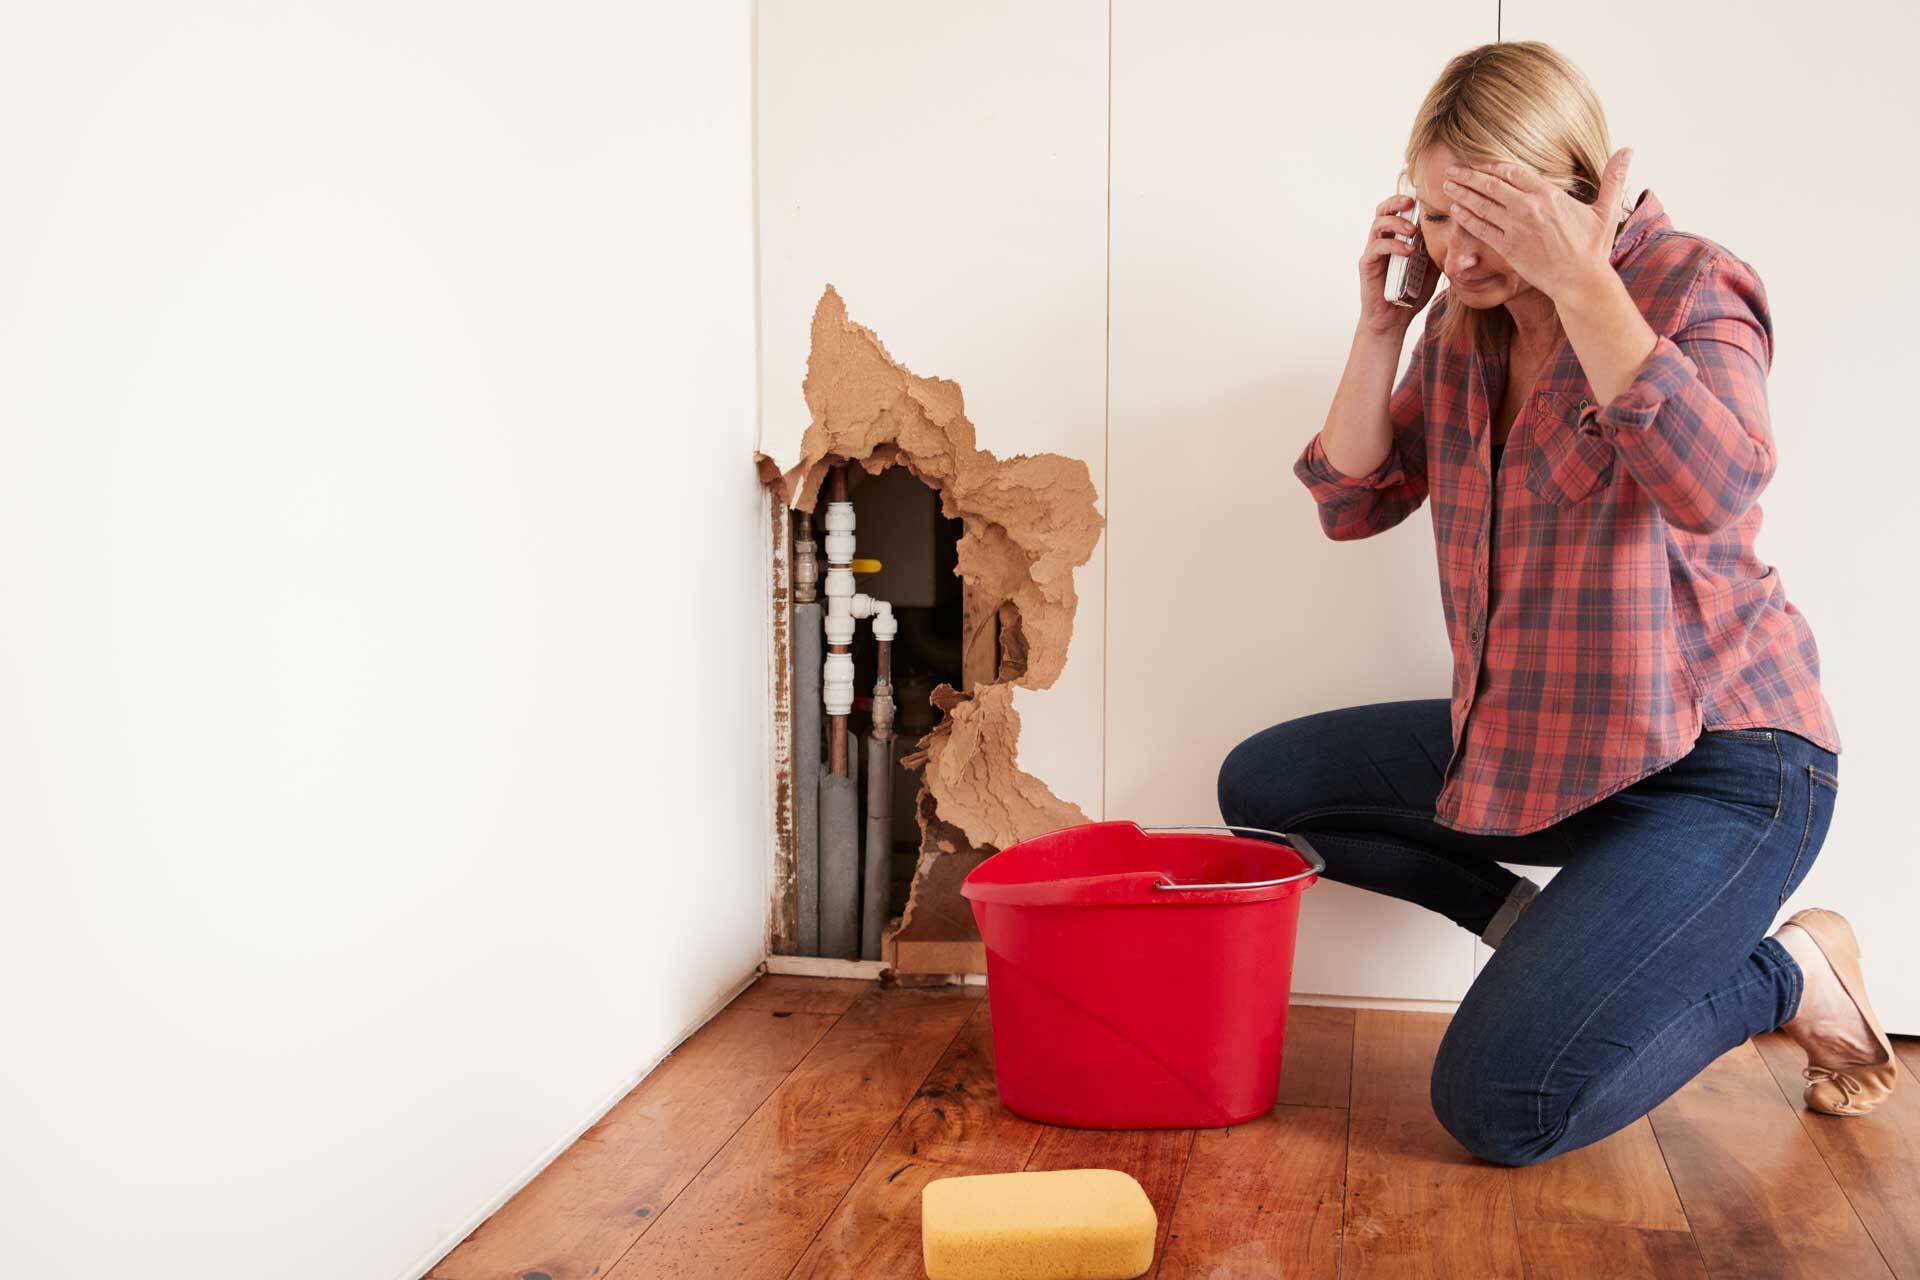 Plumbing problems you should NOT fix yourself